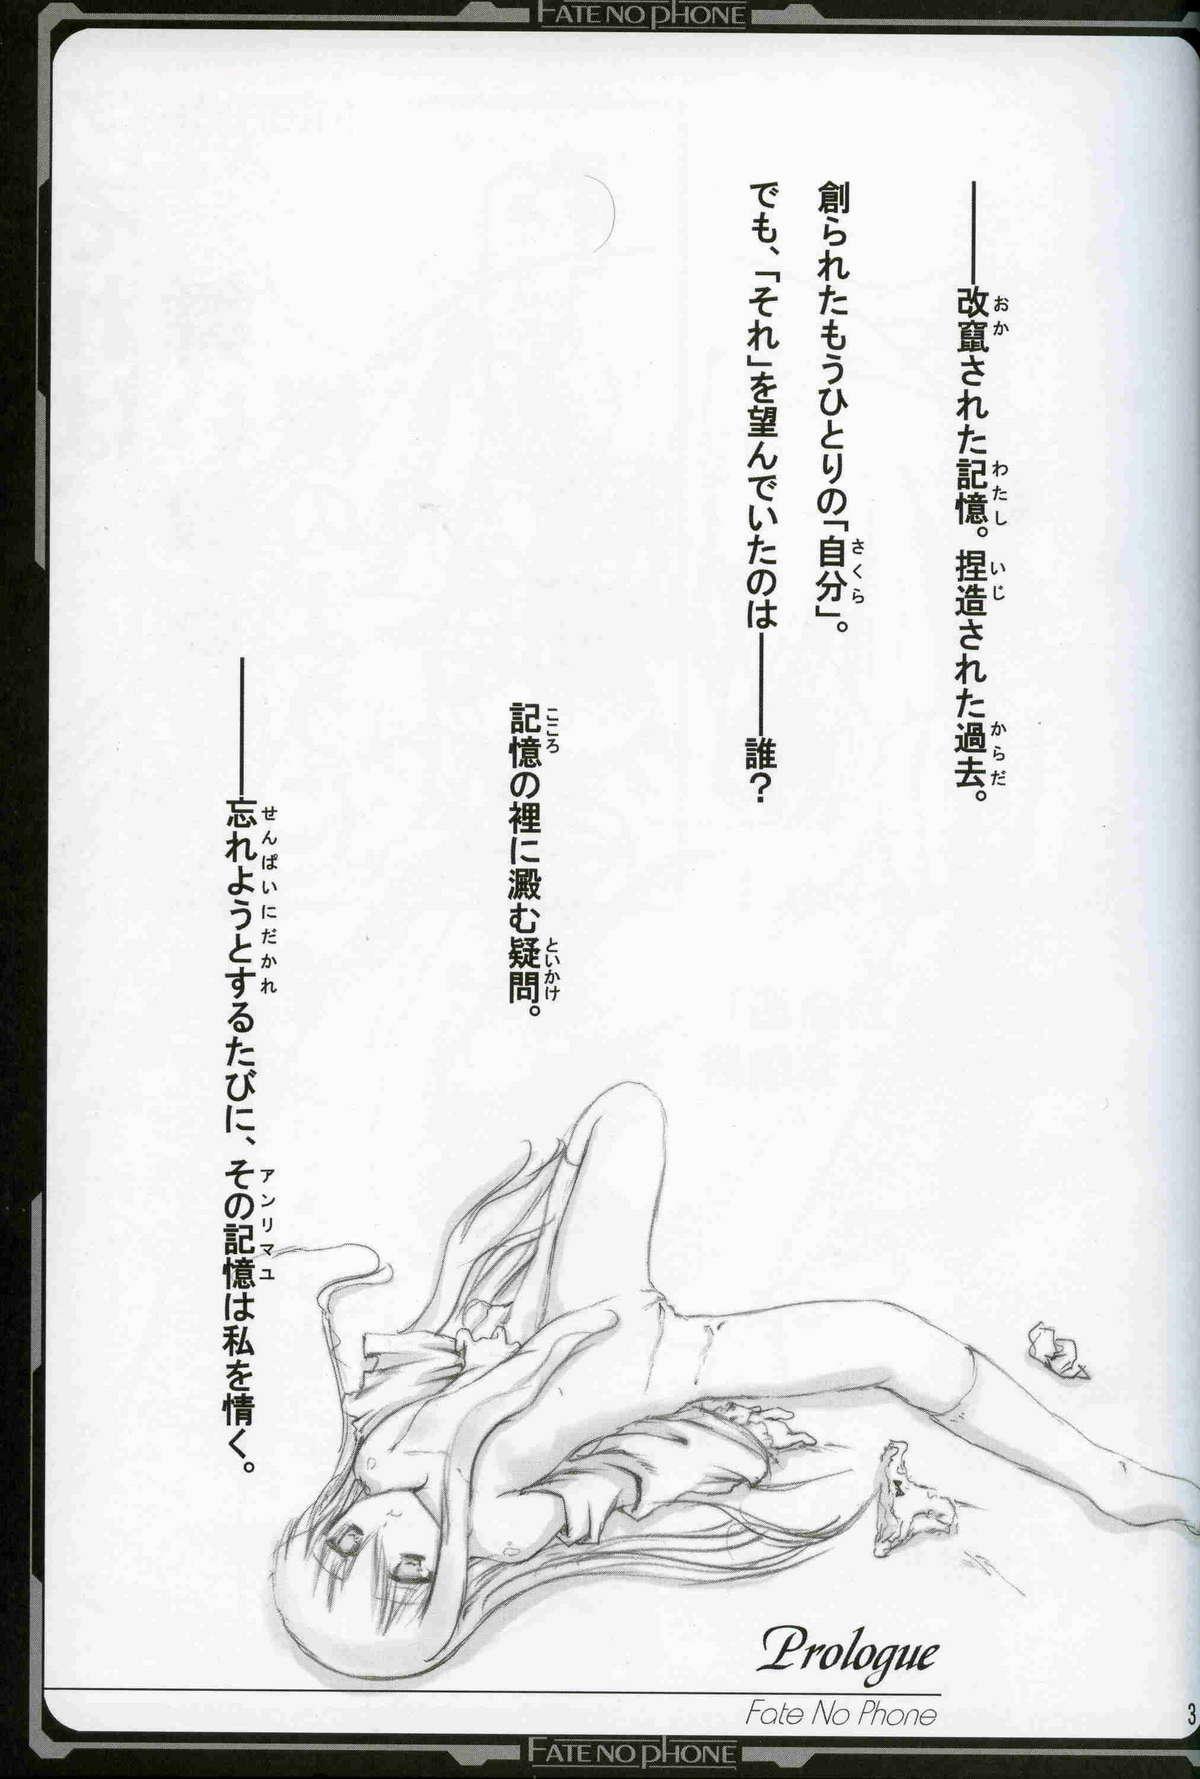 Sislovesme Fate/no phone - Fate stay night Khmer - Page 2